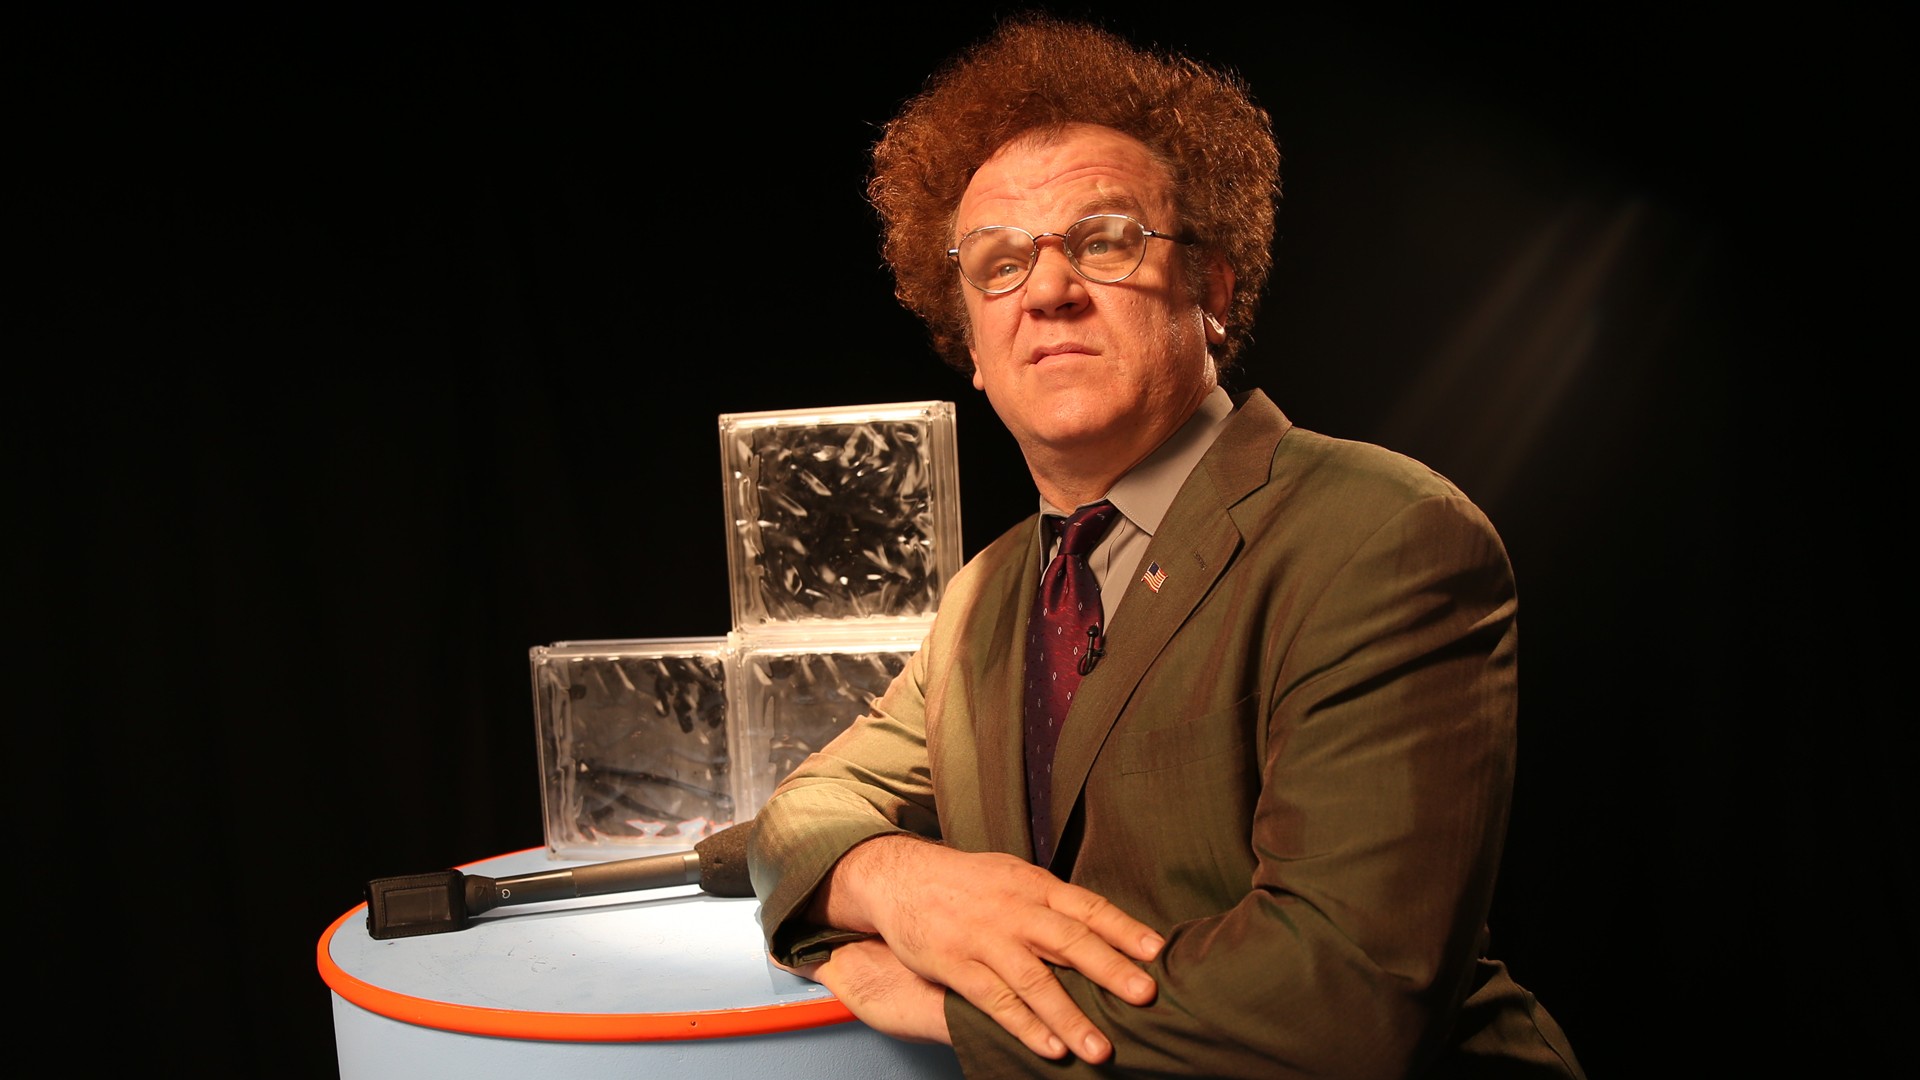 Check It Out! with Dr. Steve Brule background